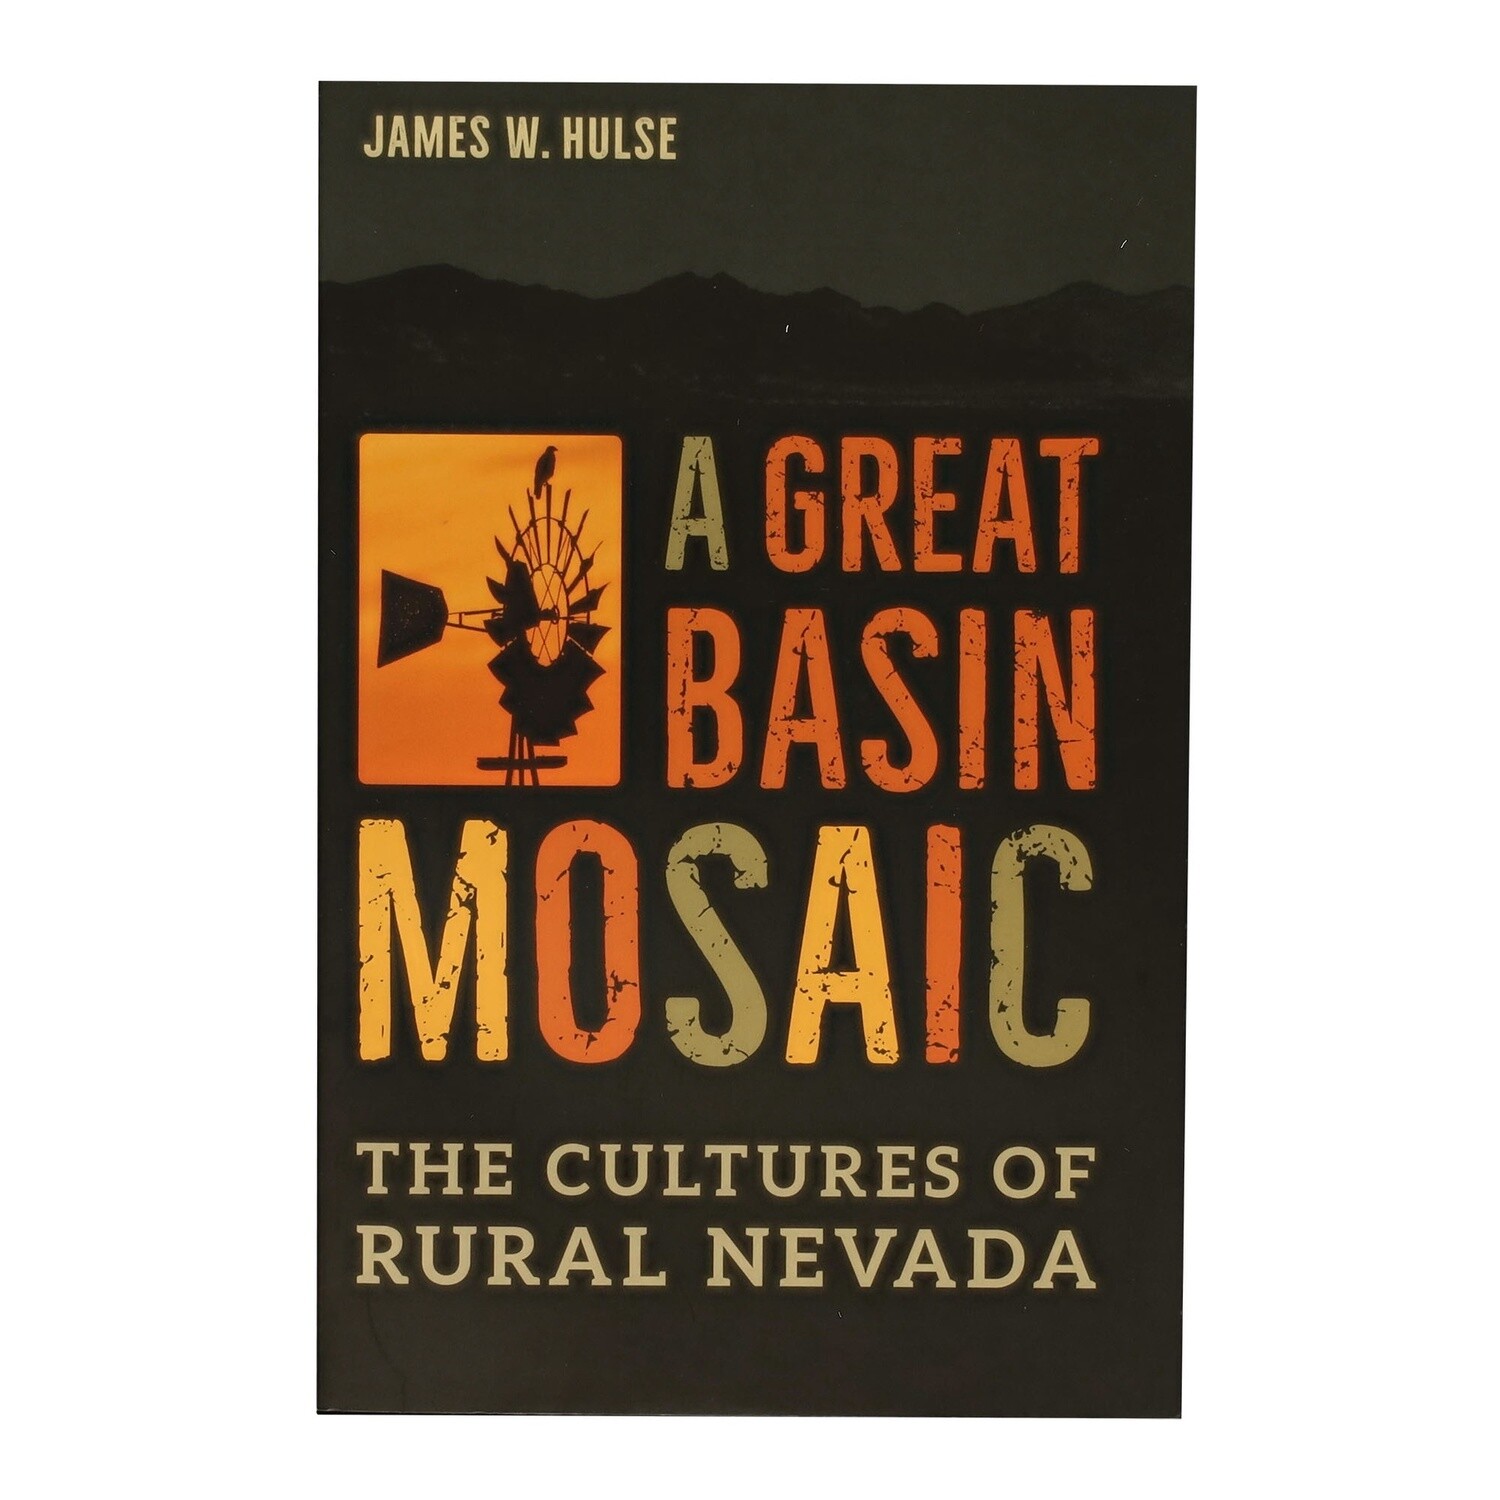 A Great Basin Mosaic - The Cultures of Rural Nevada by James W. Hulse